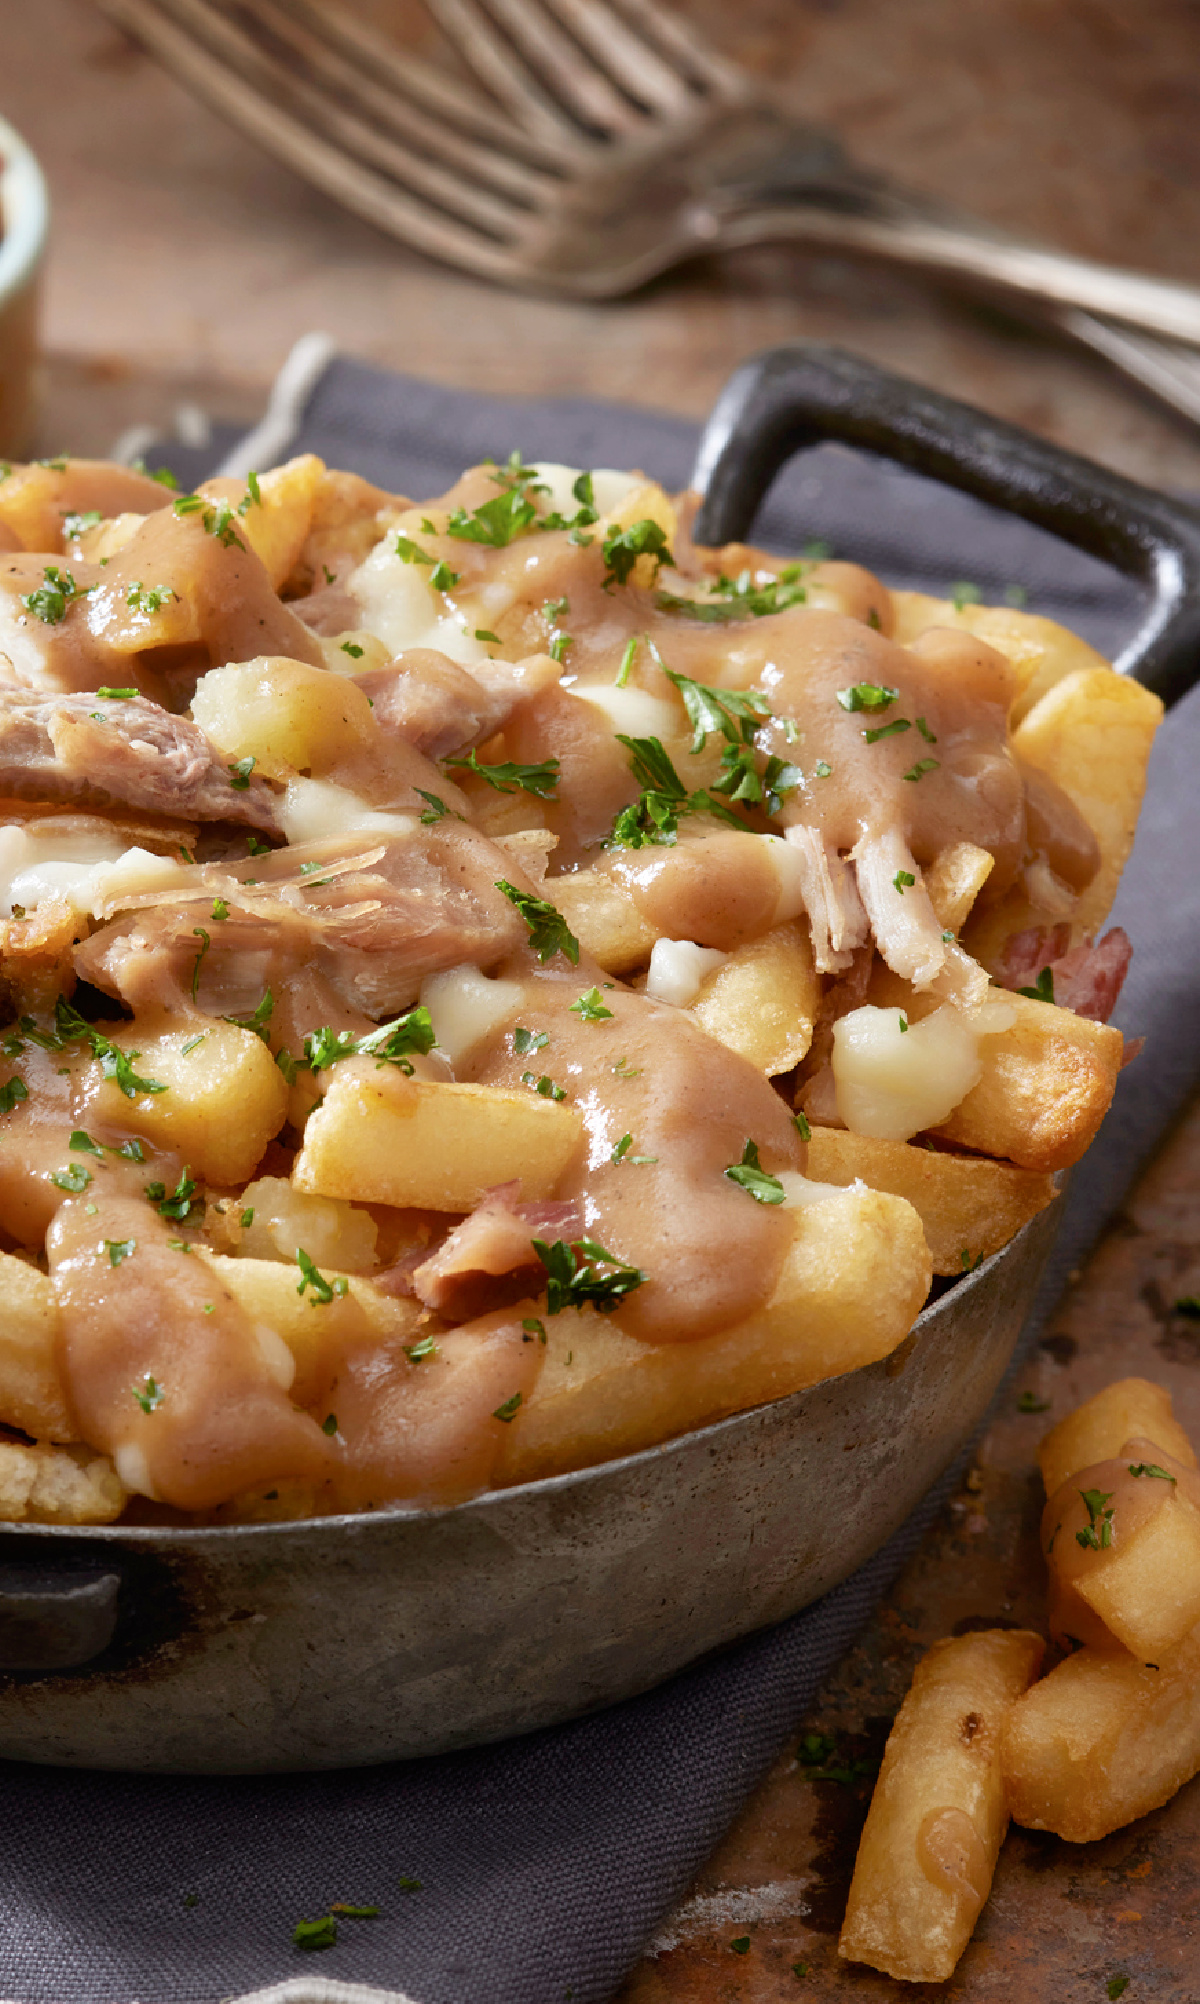 Classic Canadian Poutine with shredded leftover Thanksgiving turkey, cheese curds and gravy